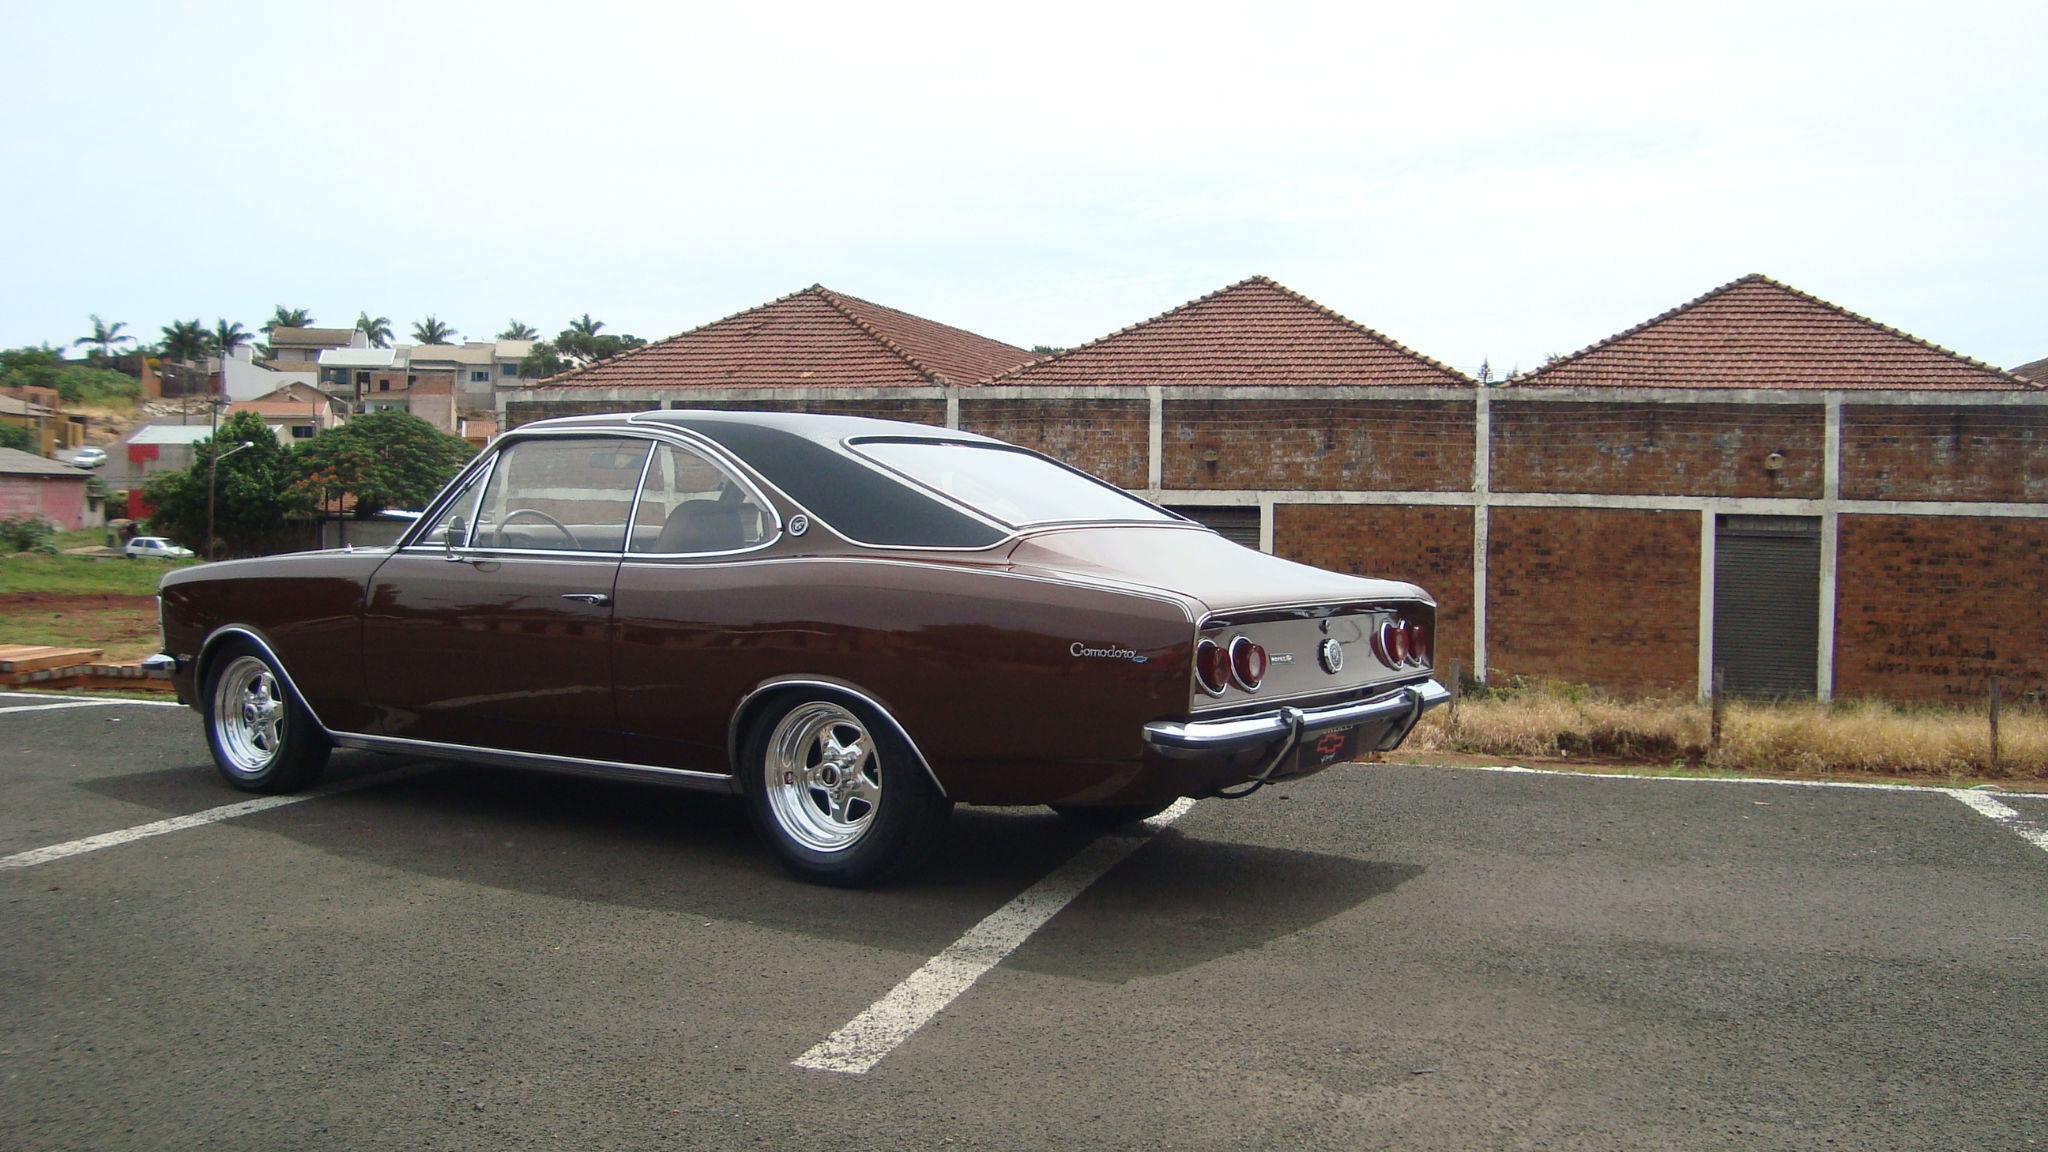 Chevrolet Opala Odoro Full HD Wallpaper And Background